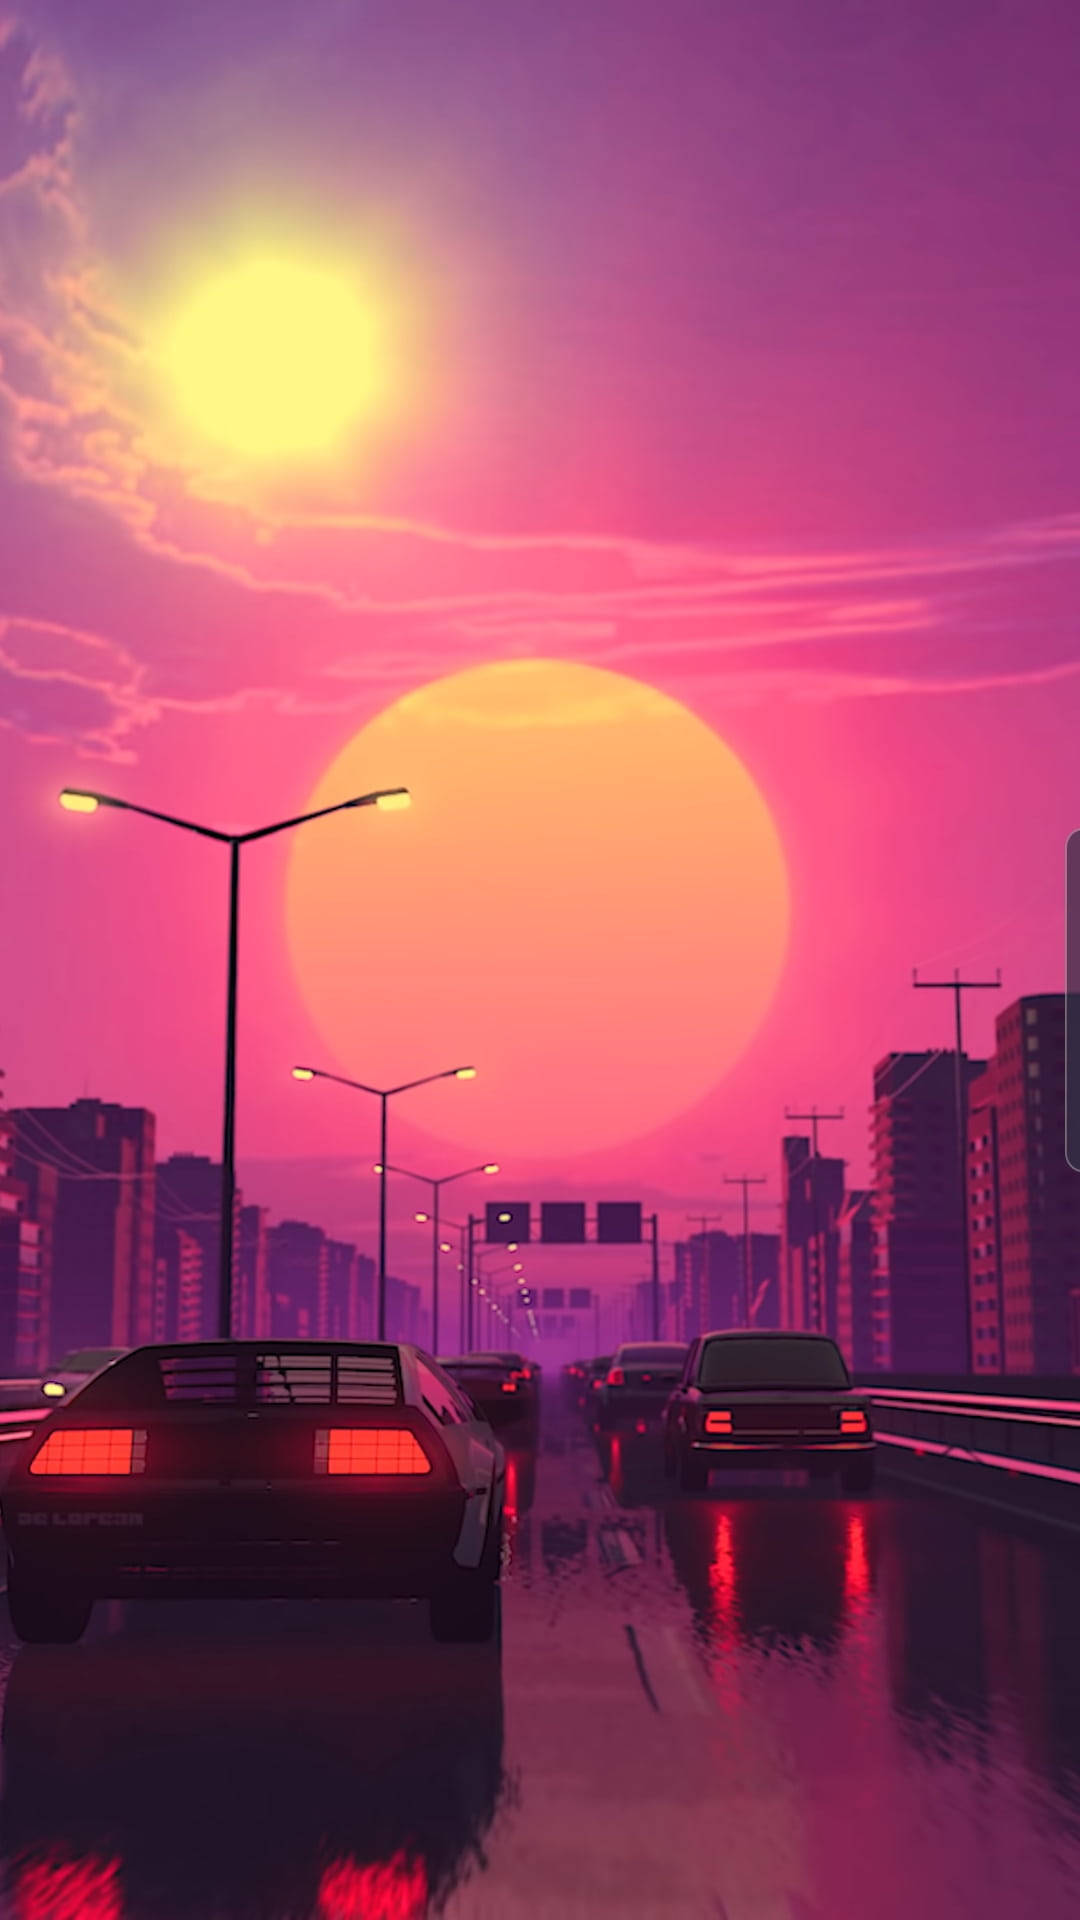 Purple Aesthetic Sunset With Cars Wallpaper